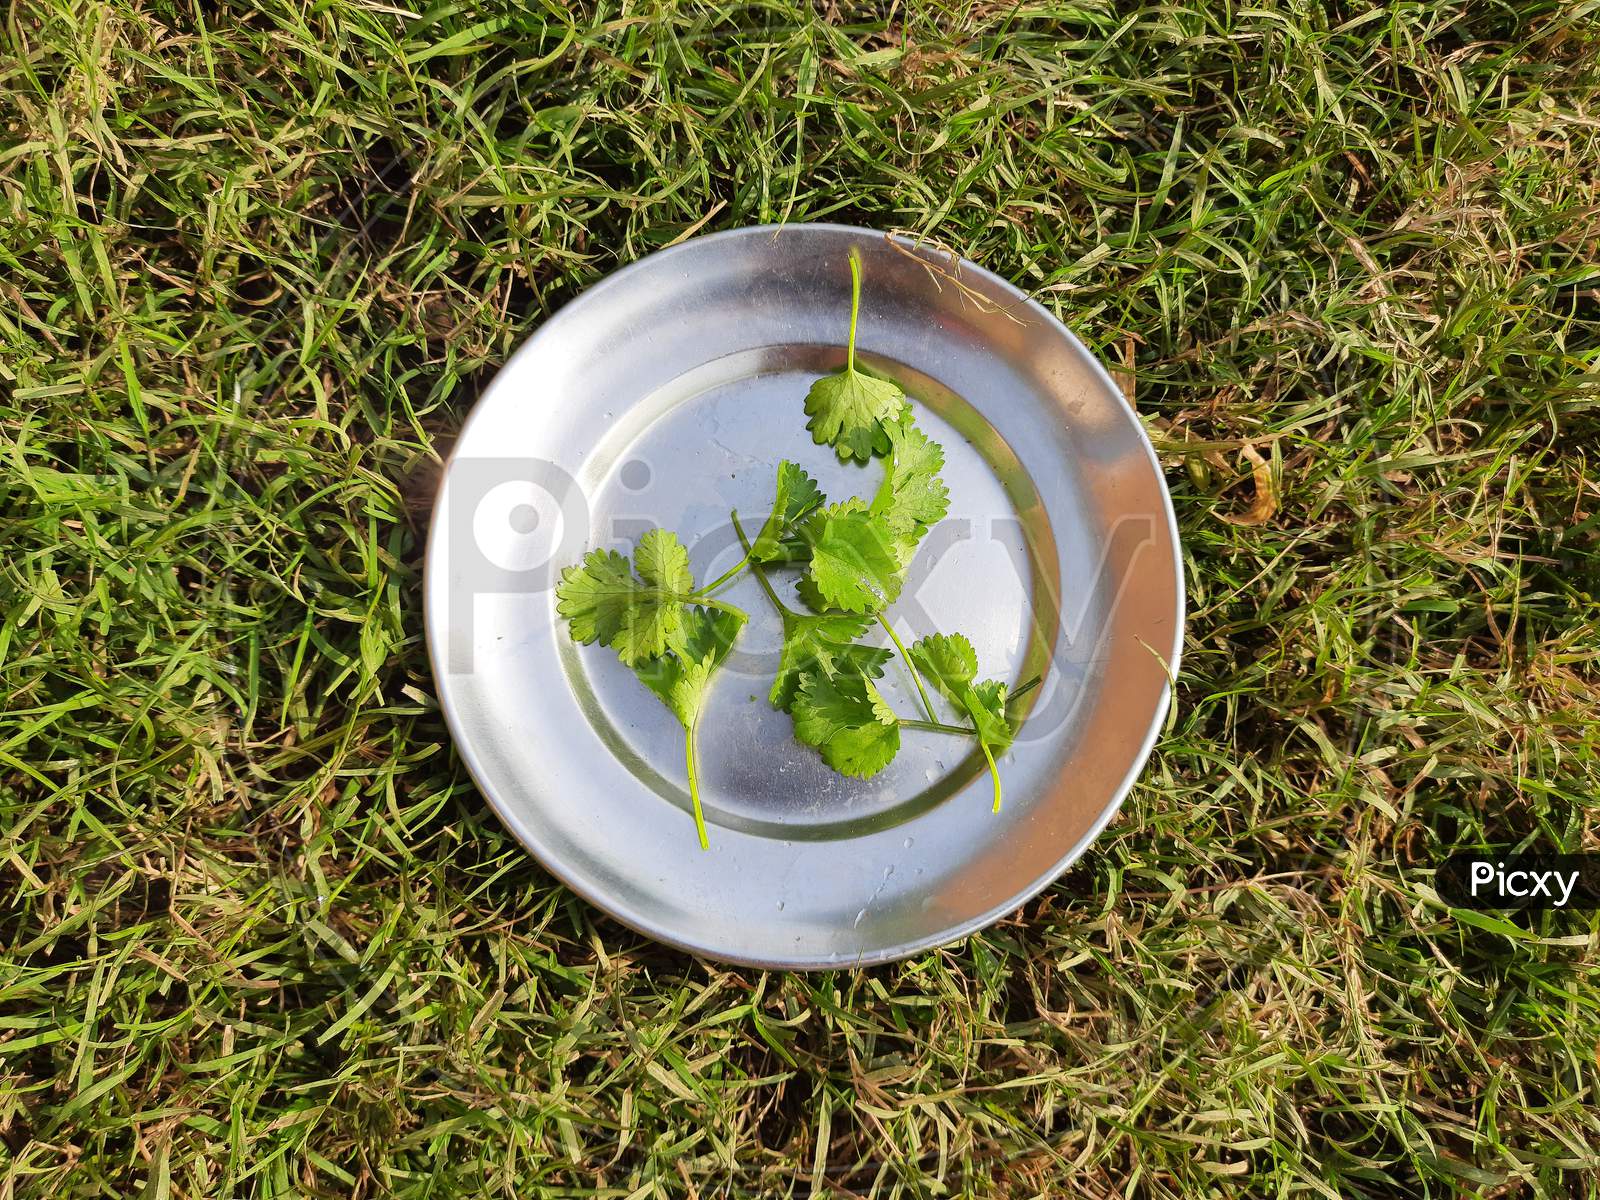 Coriander leaves on the plate in green background.